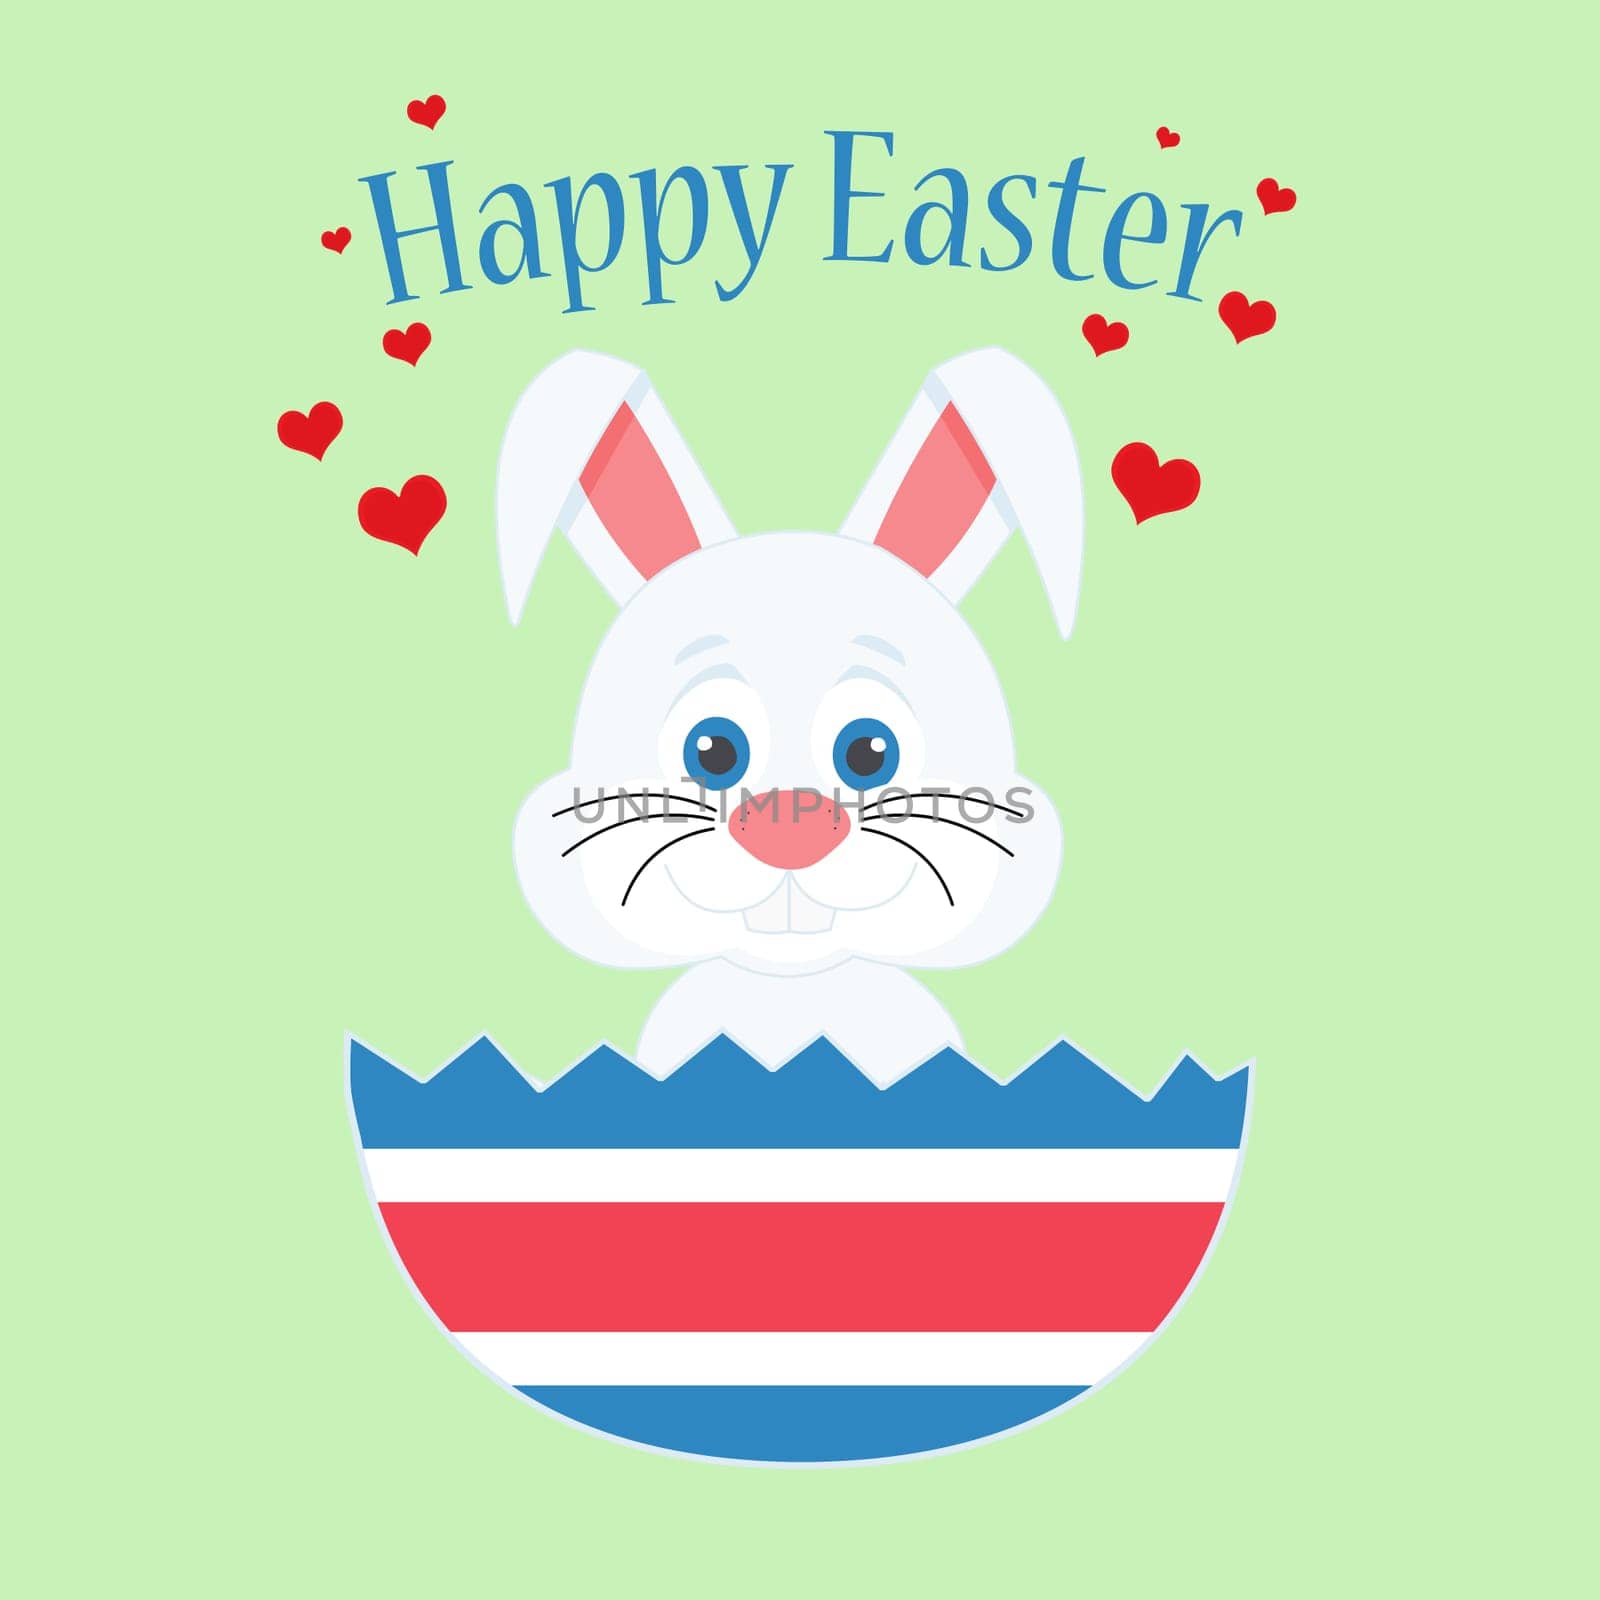 A cute easter bunny inside a egg with the text "Happy Easter" and floating love hearts.